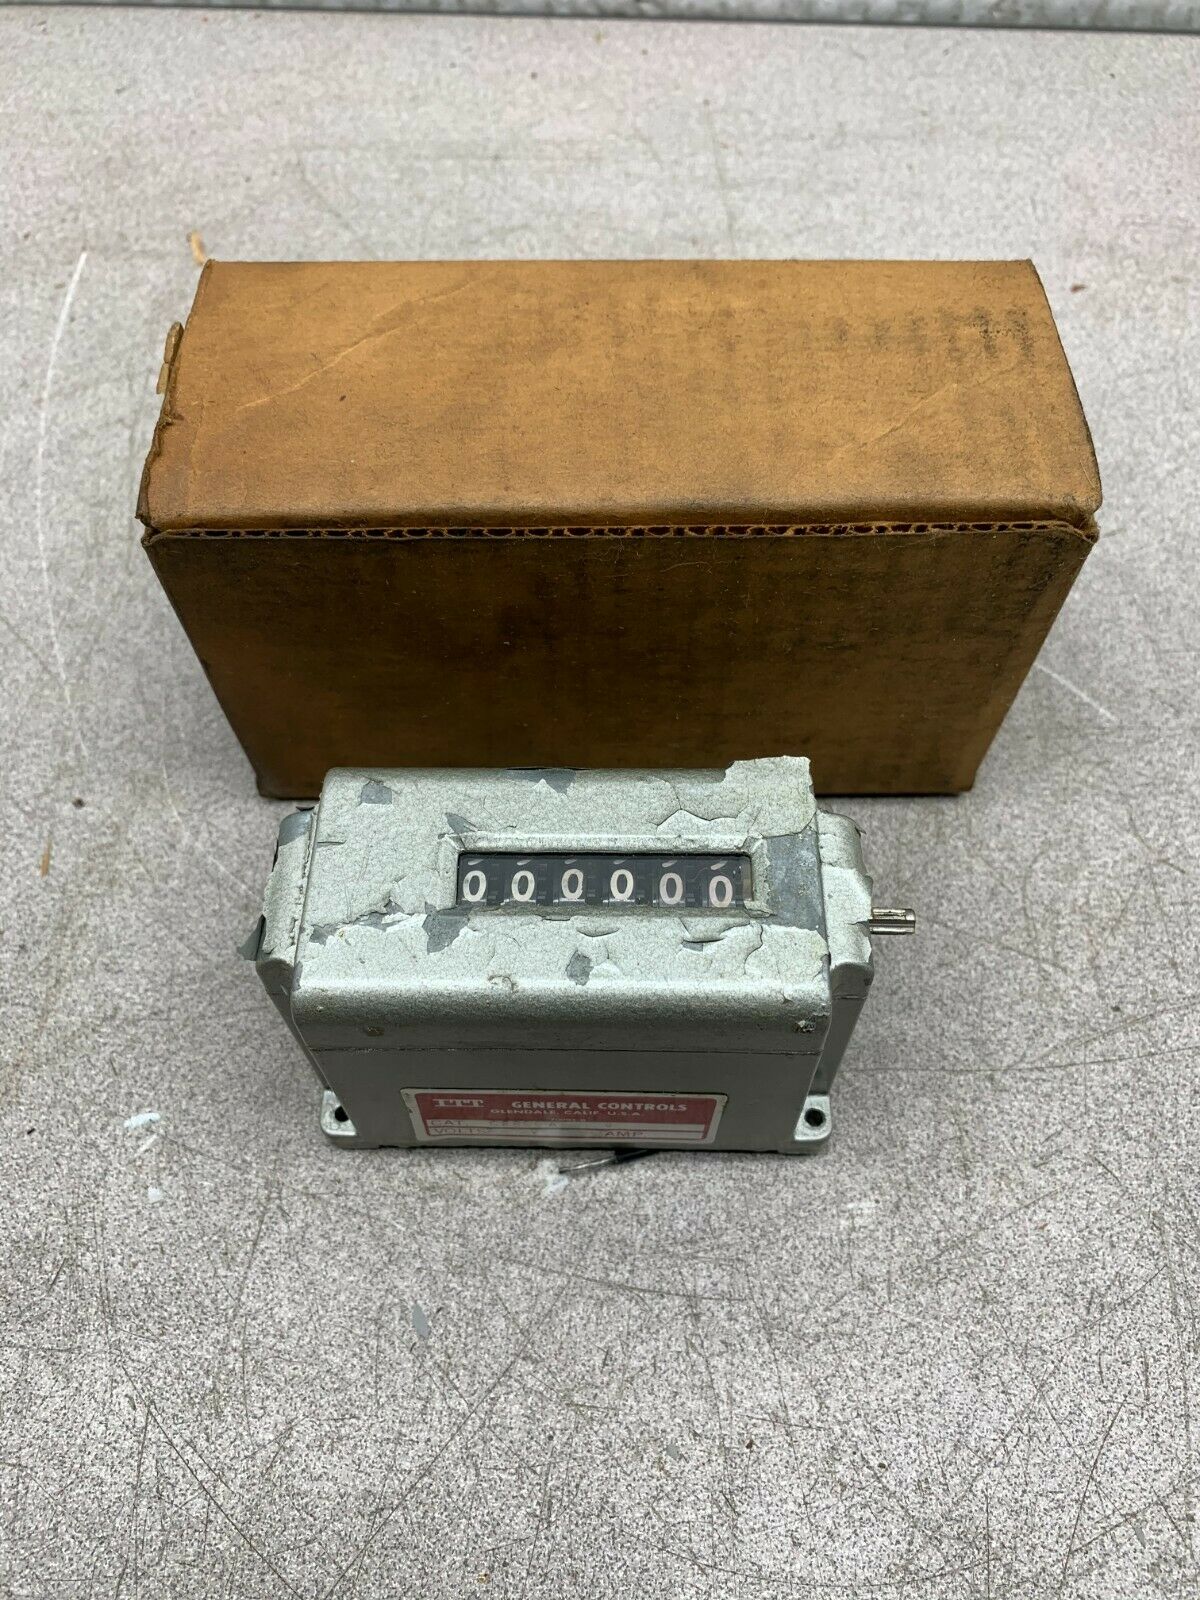 NEW IN BOX ITT GENERAL CONTROLS 240V. TIMER CE600AS604